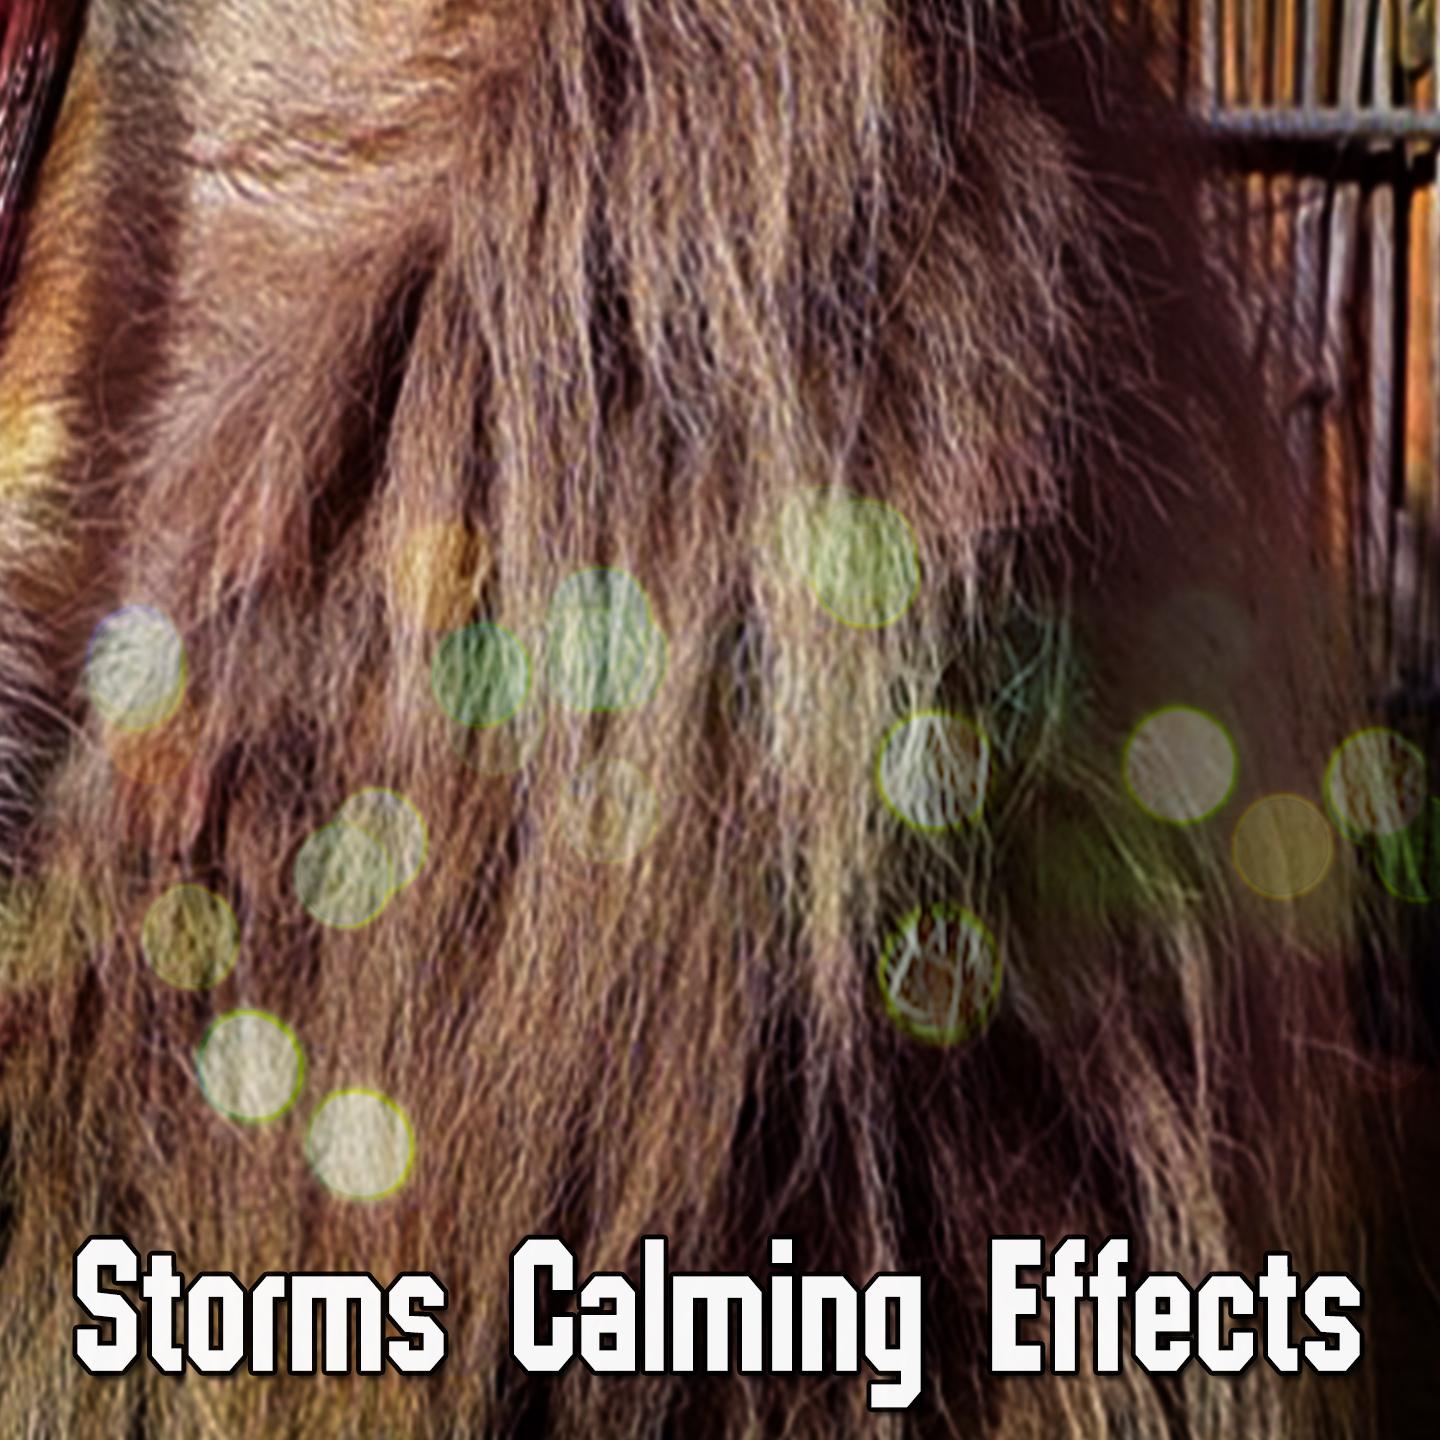 Storms Calming Effects